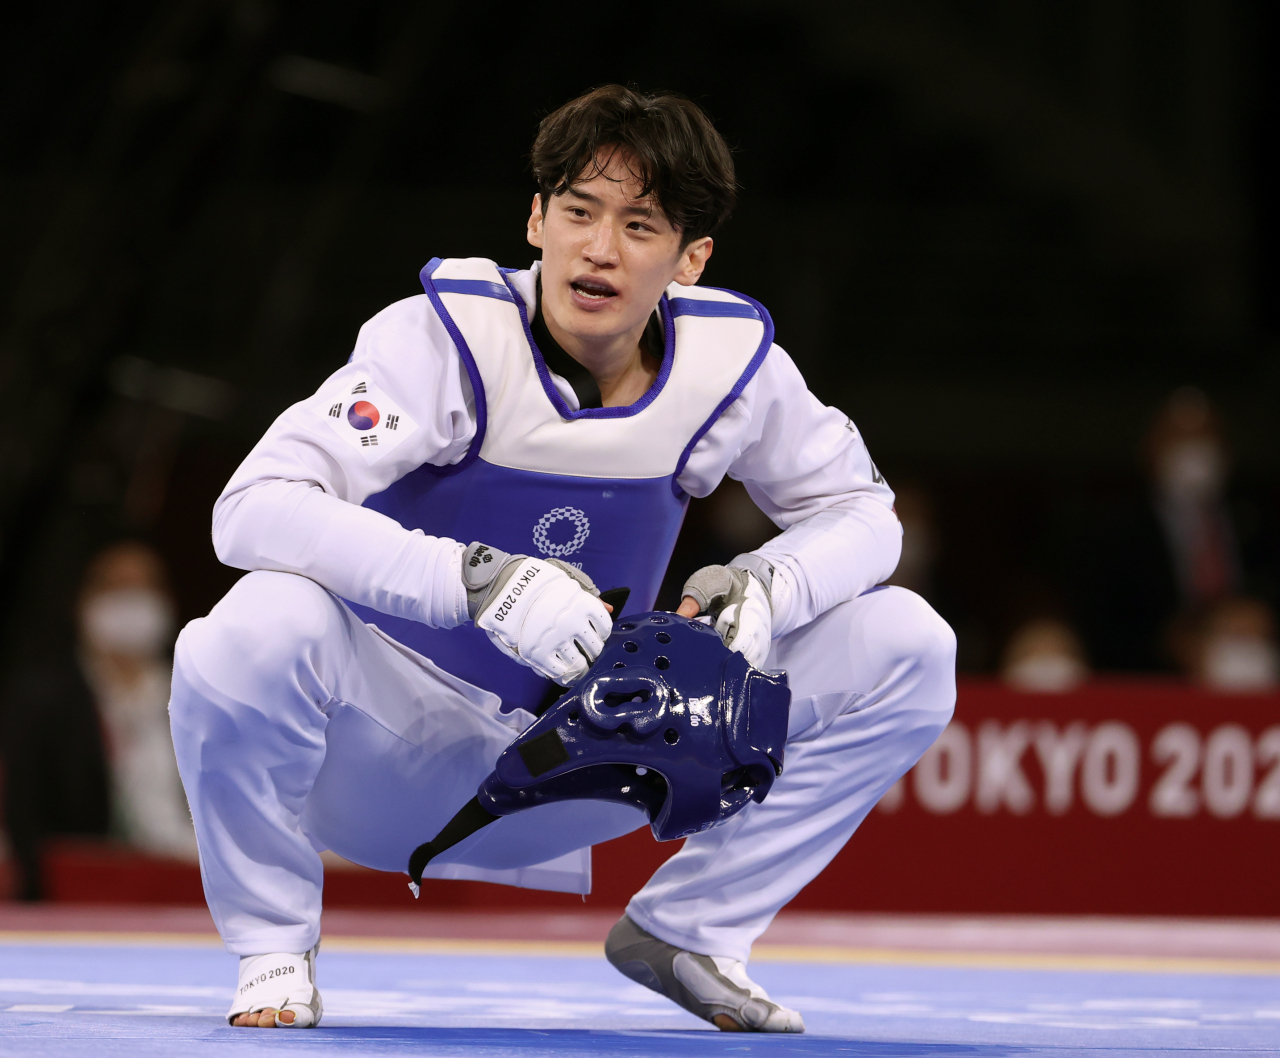 Tokyo Olympics] Shocked taekwondo star rues another missed opportunity